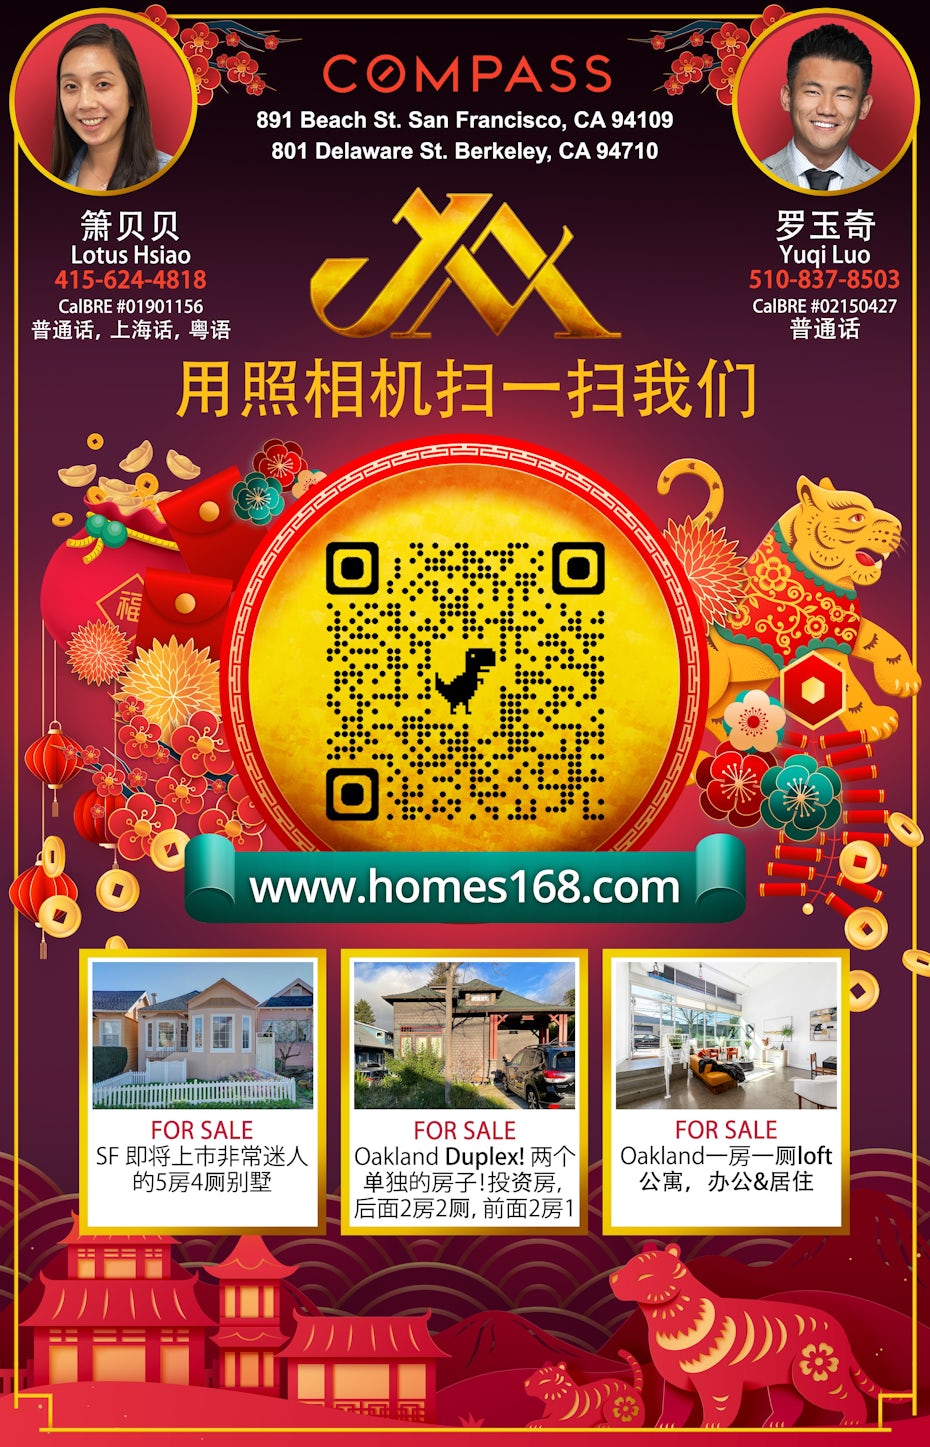 colorful real estate ad showing agents, home and tiger graphics